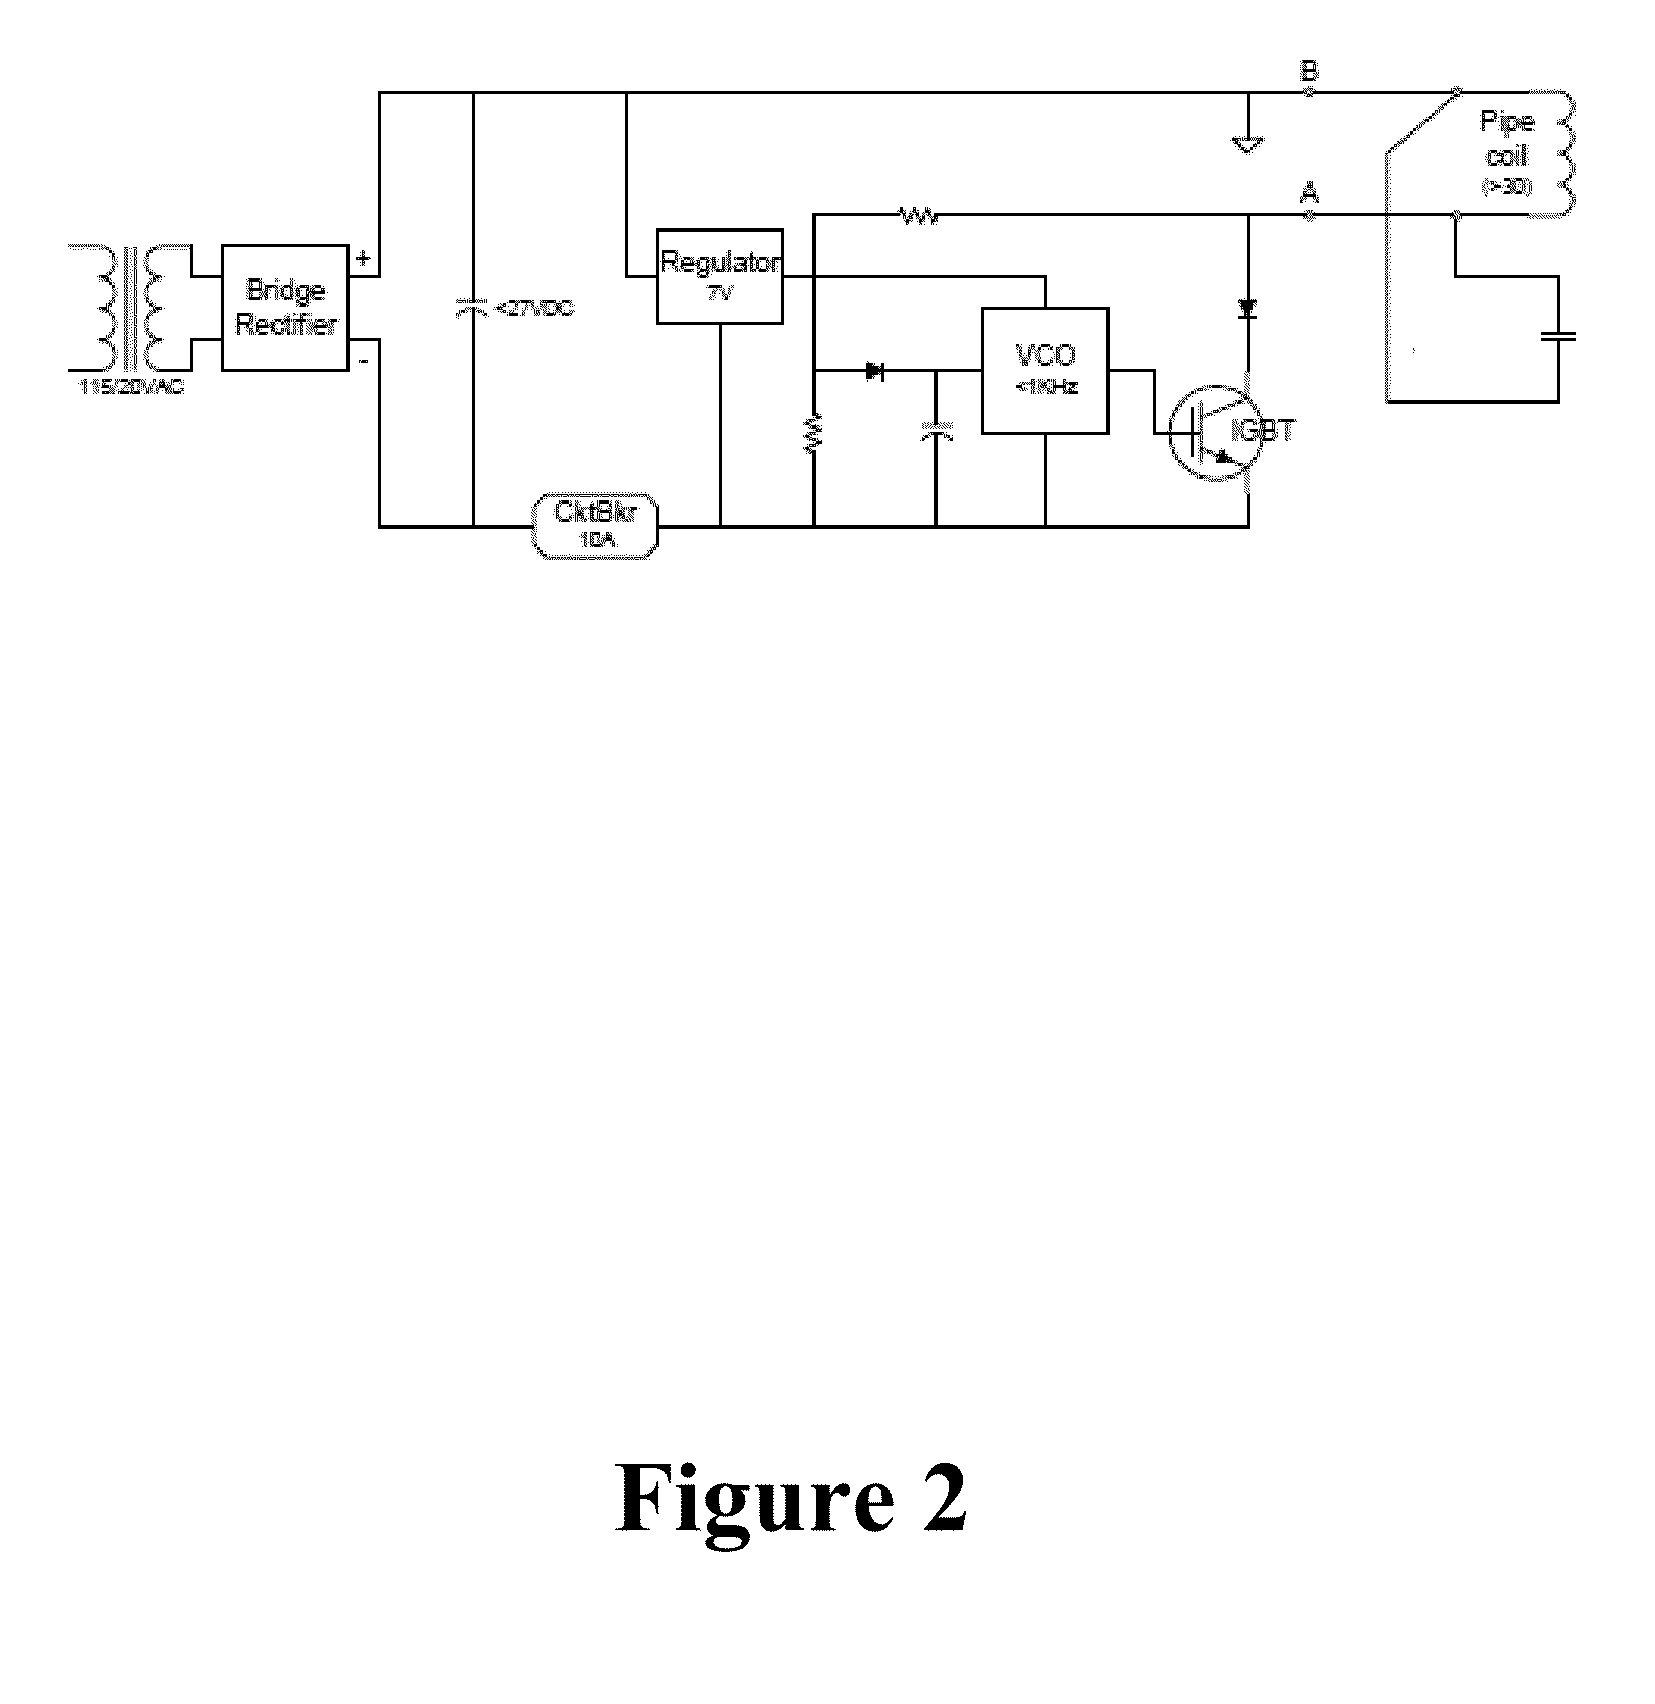 Pulse-power apparatus and water treatment system for inhibiting scale formation and microorganism growth